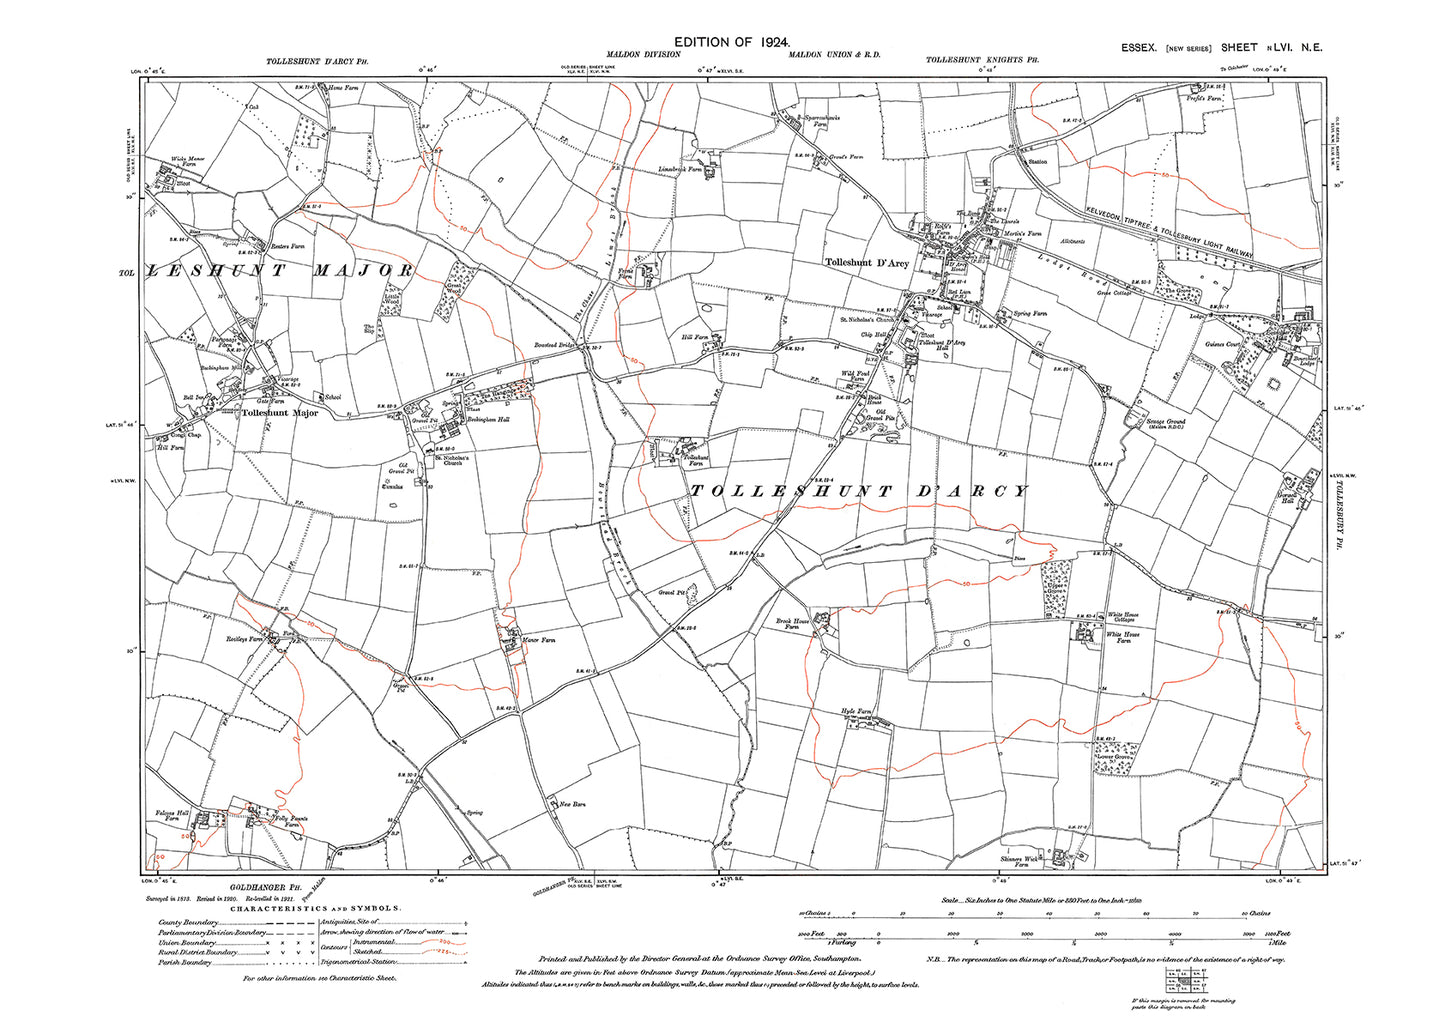 Old OS map dated 1924, showing Tolleshunt D'Arcy and Tolleshunt Major in Essex - 56NE